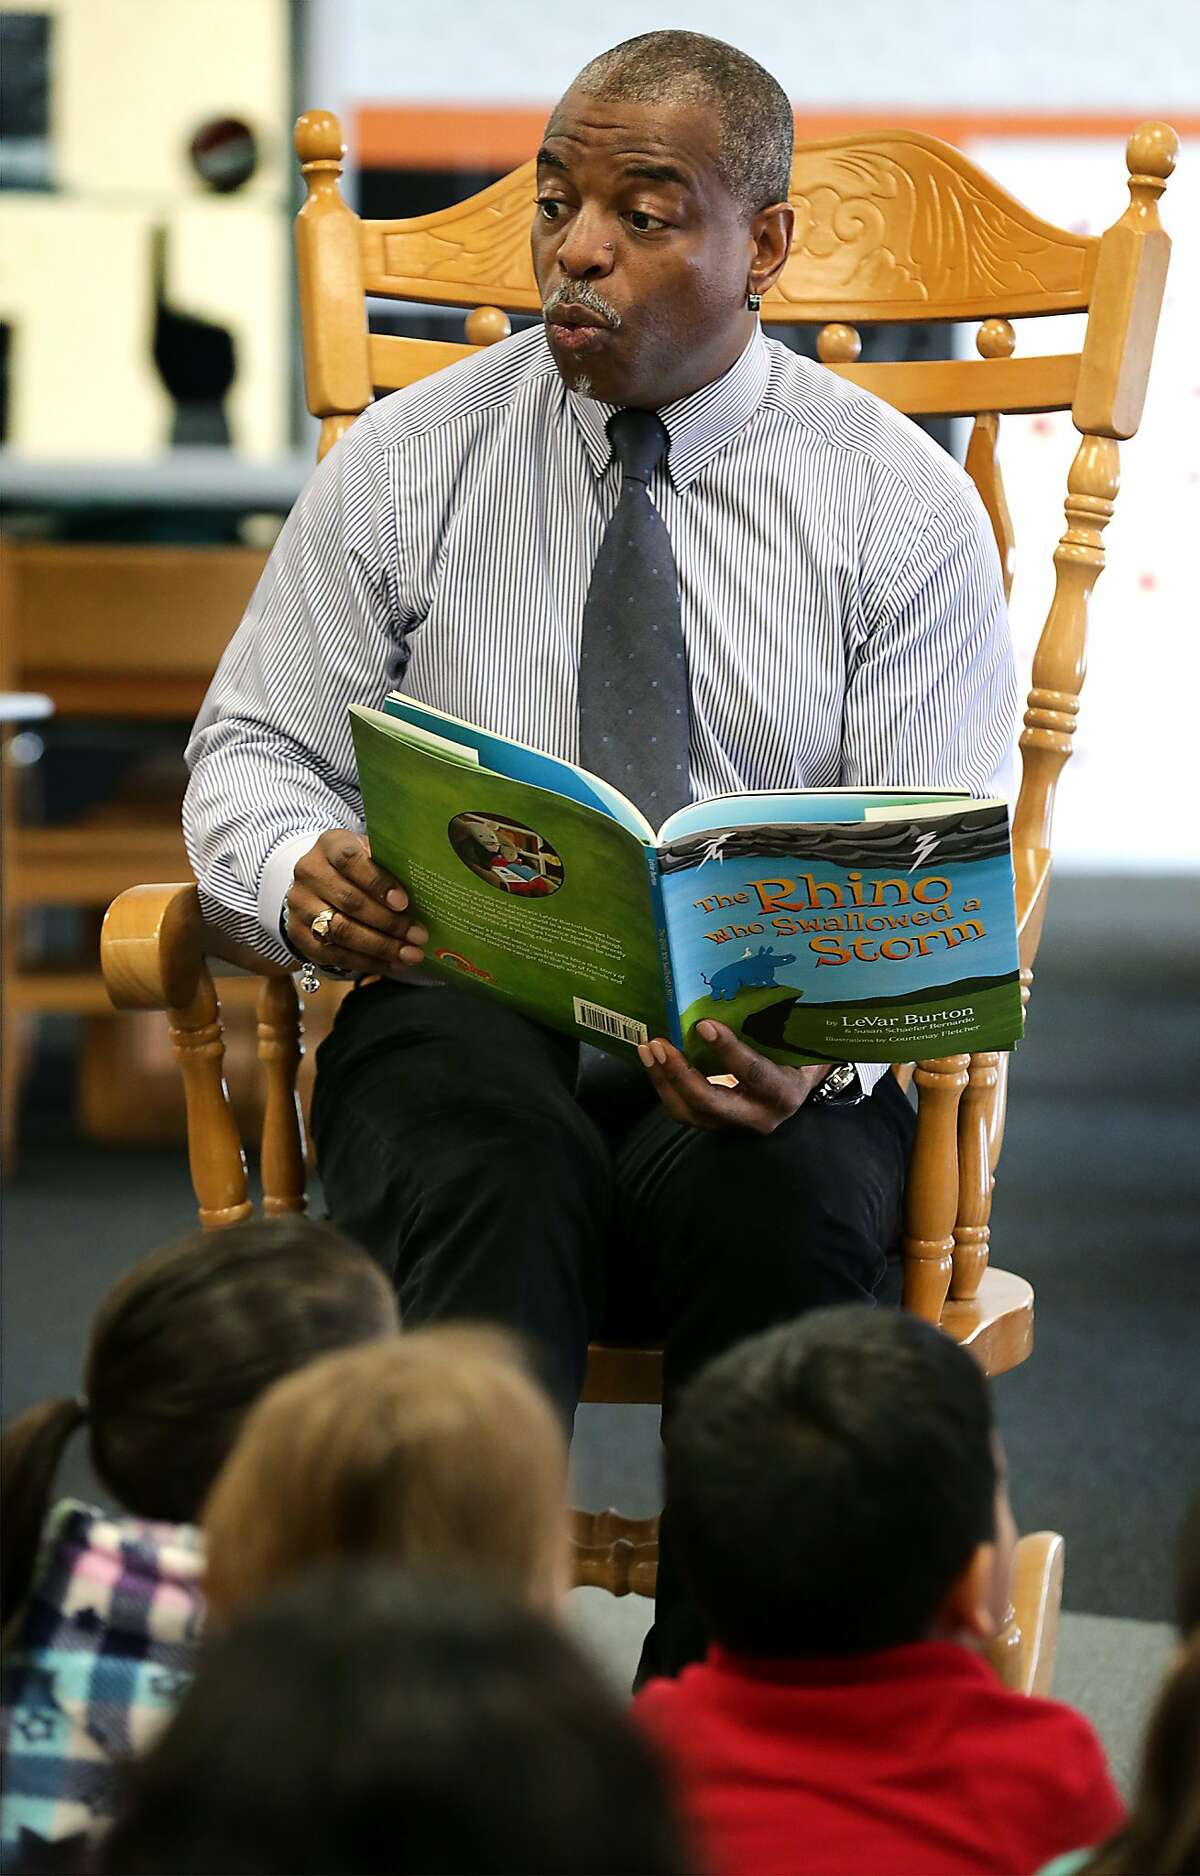 LeVar Burton, host of "Reading Rainbow" and actor in "Roots" and "Star Trek", reads his children's book "The Rhino Who Swallowed A Storm" to students at Bowden Elementary School on Thursday, Feb. 11, 2016.